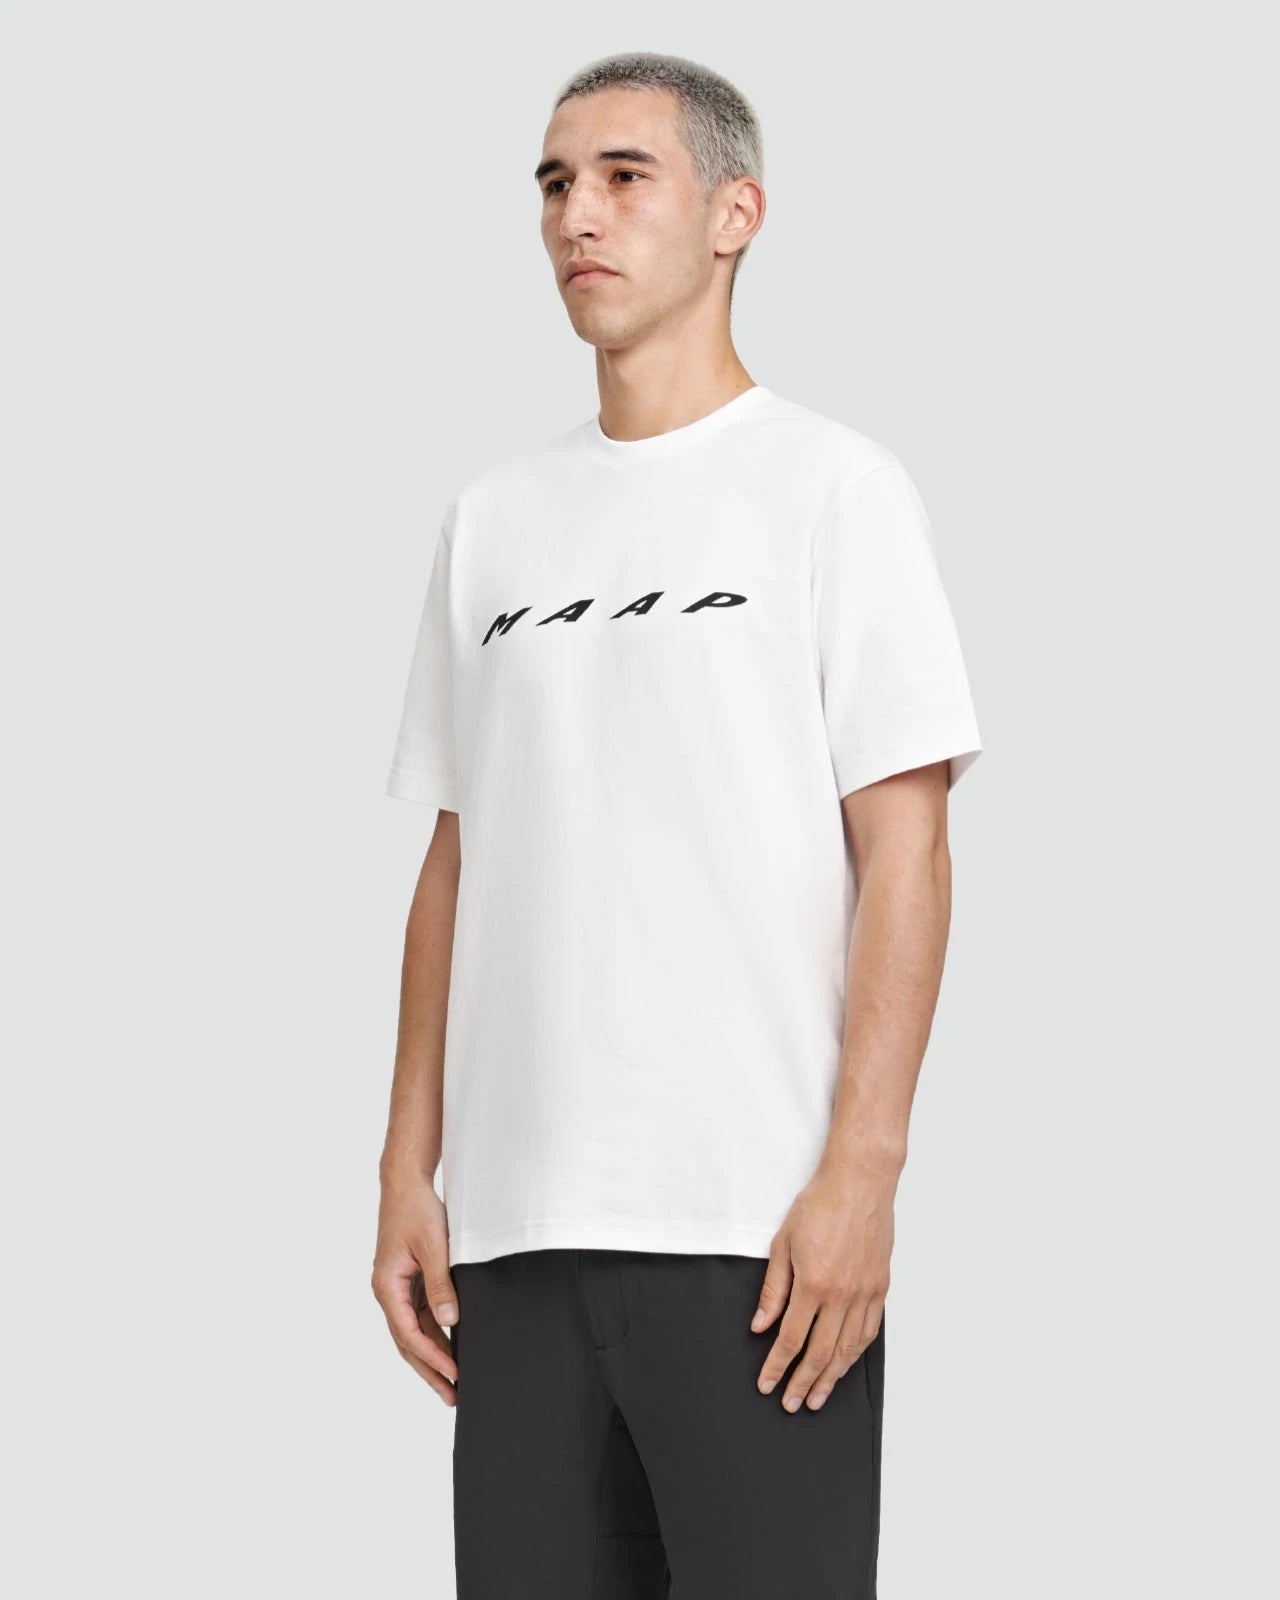 MAAP Evade White サイクル Tシャツ | CYCLISM